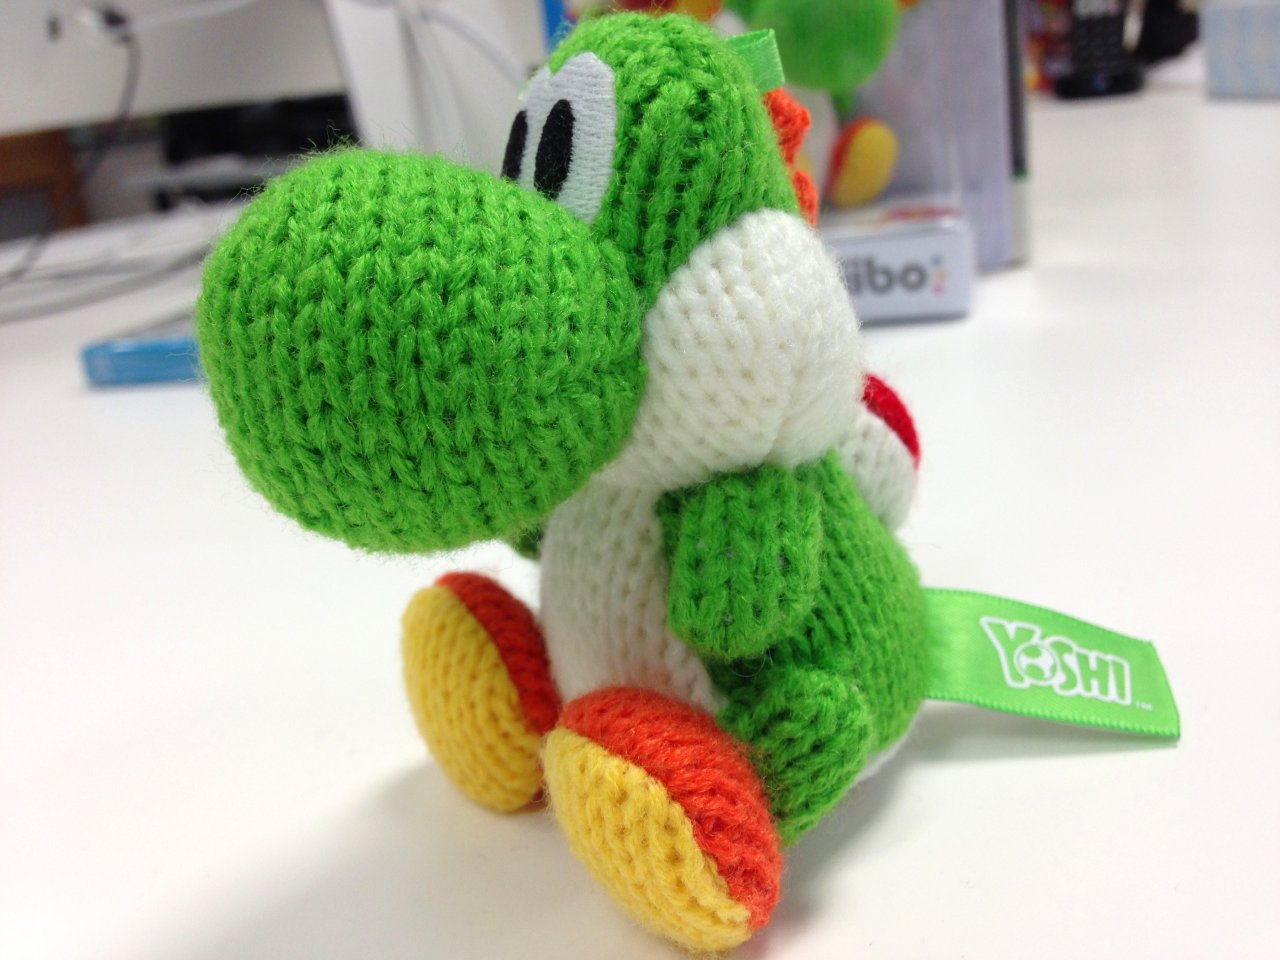 Gallery The Yarn Yoshi Amiibo Is So Cute And Cuddly It Hurts